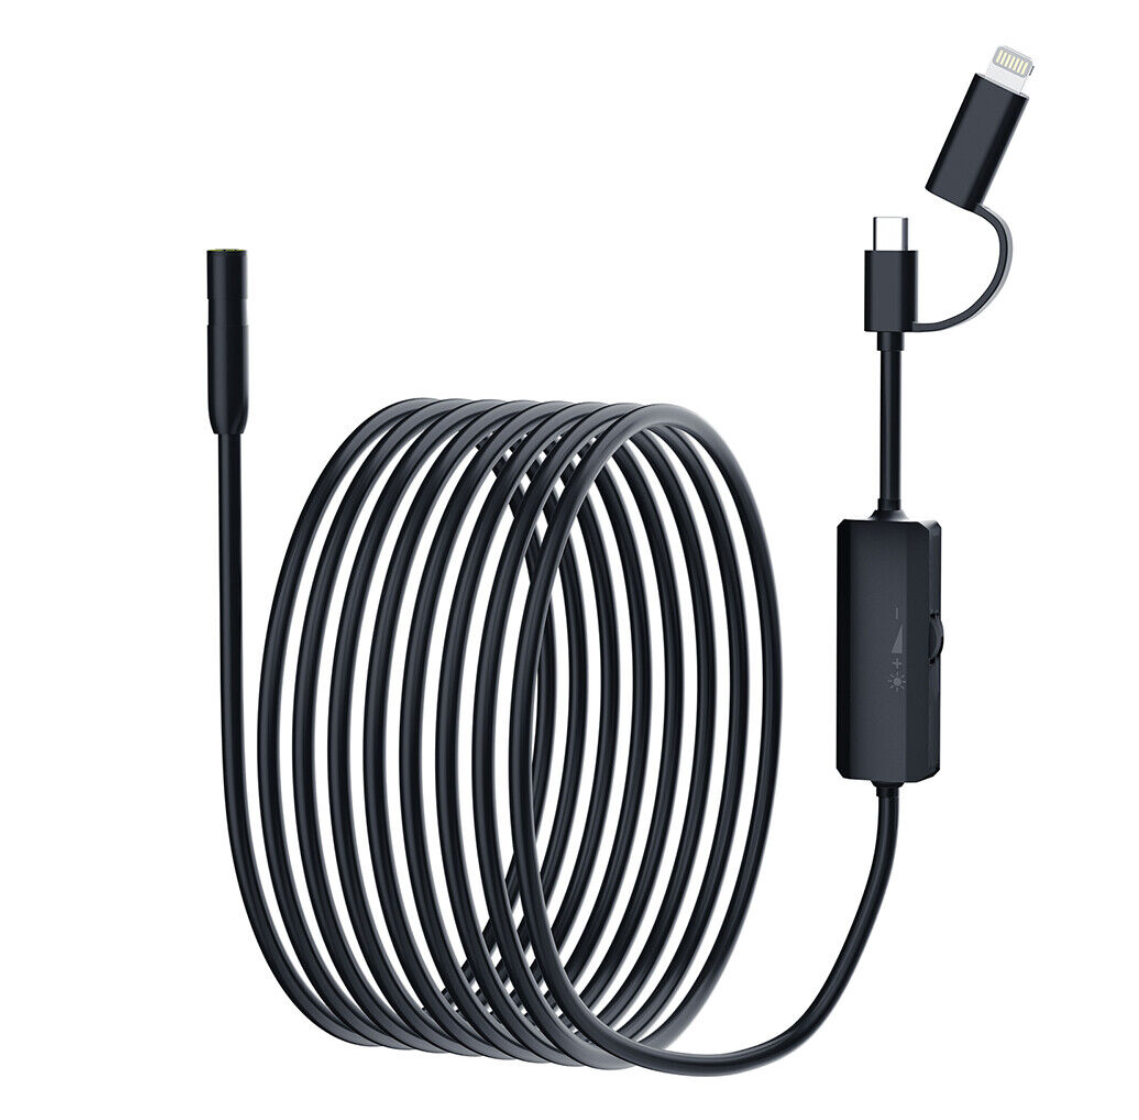 HD IP68 Borescope Inspection Camera For iPhone & Android